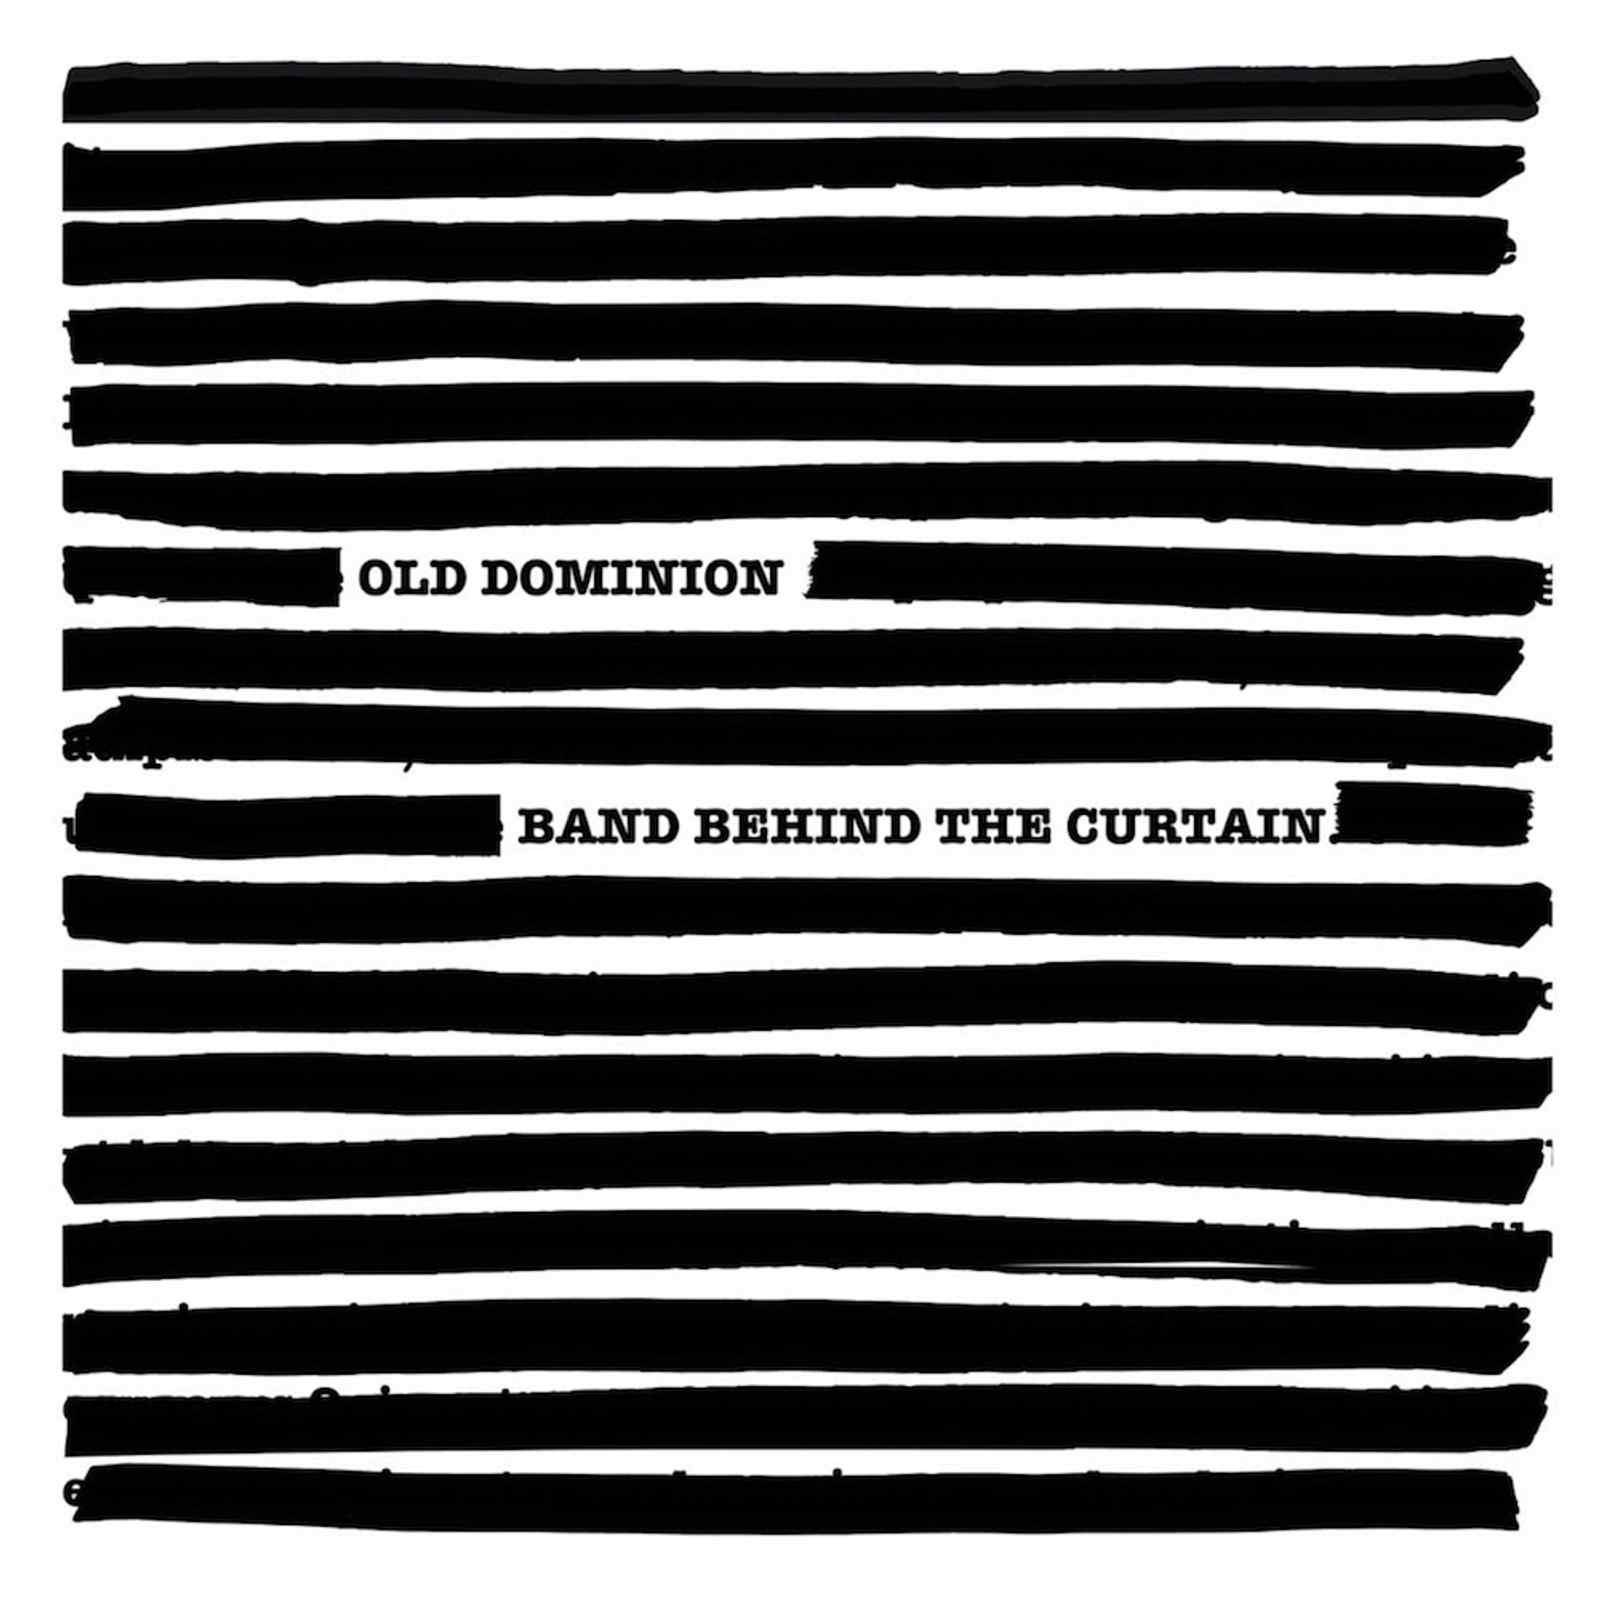 Band Behind the Curtain by Old Dominion